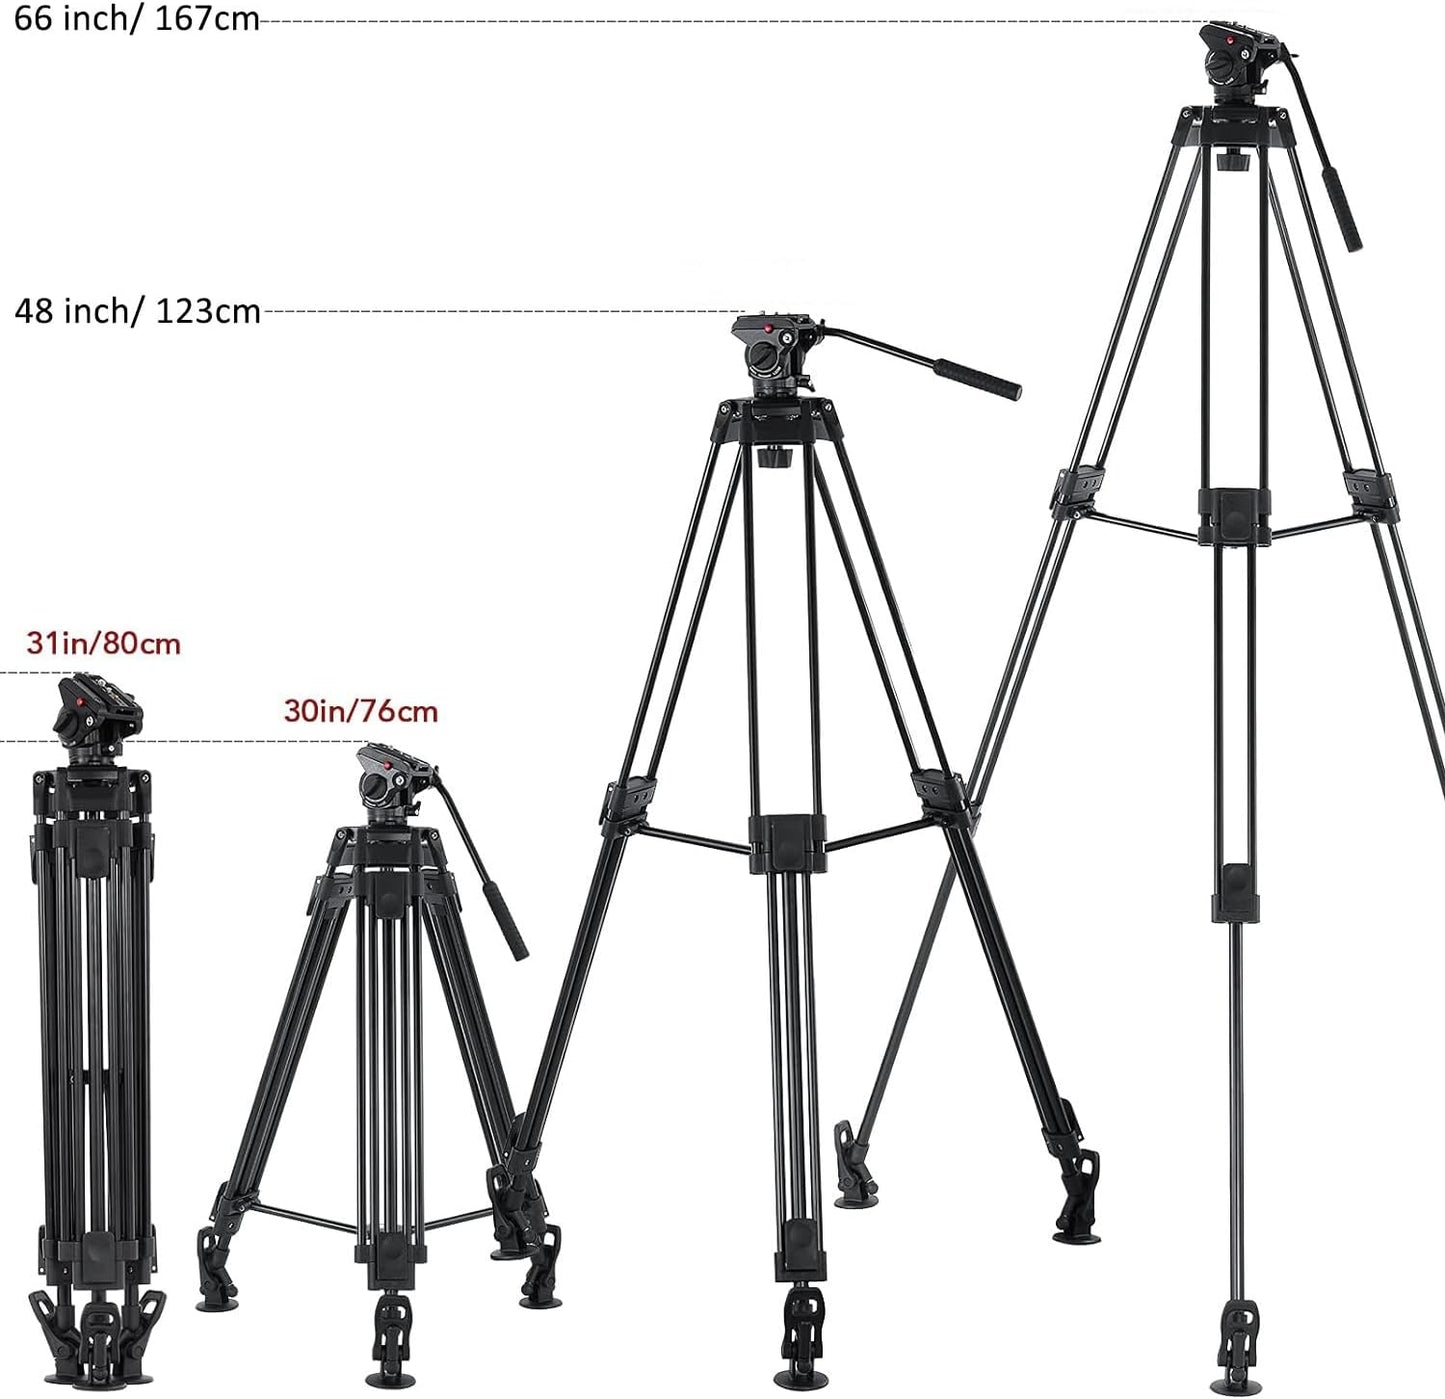 CAMBOFOTO 67 inch Video Tripod Heavy Duty Tripod with 360 Fluid Head,Mactrem Aluminum Tall Tripods Professional Compatible with Canon Nikon Sony DSLR Camera Camcorder Telescope Bnoculars